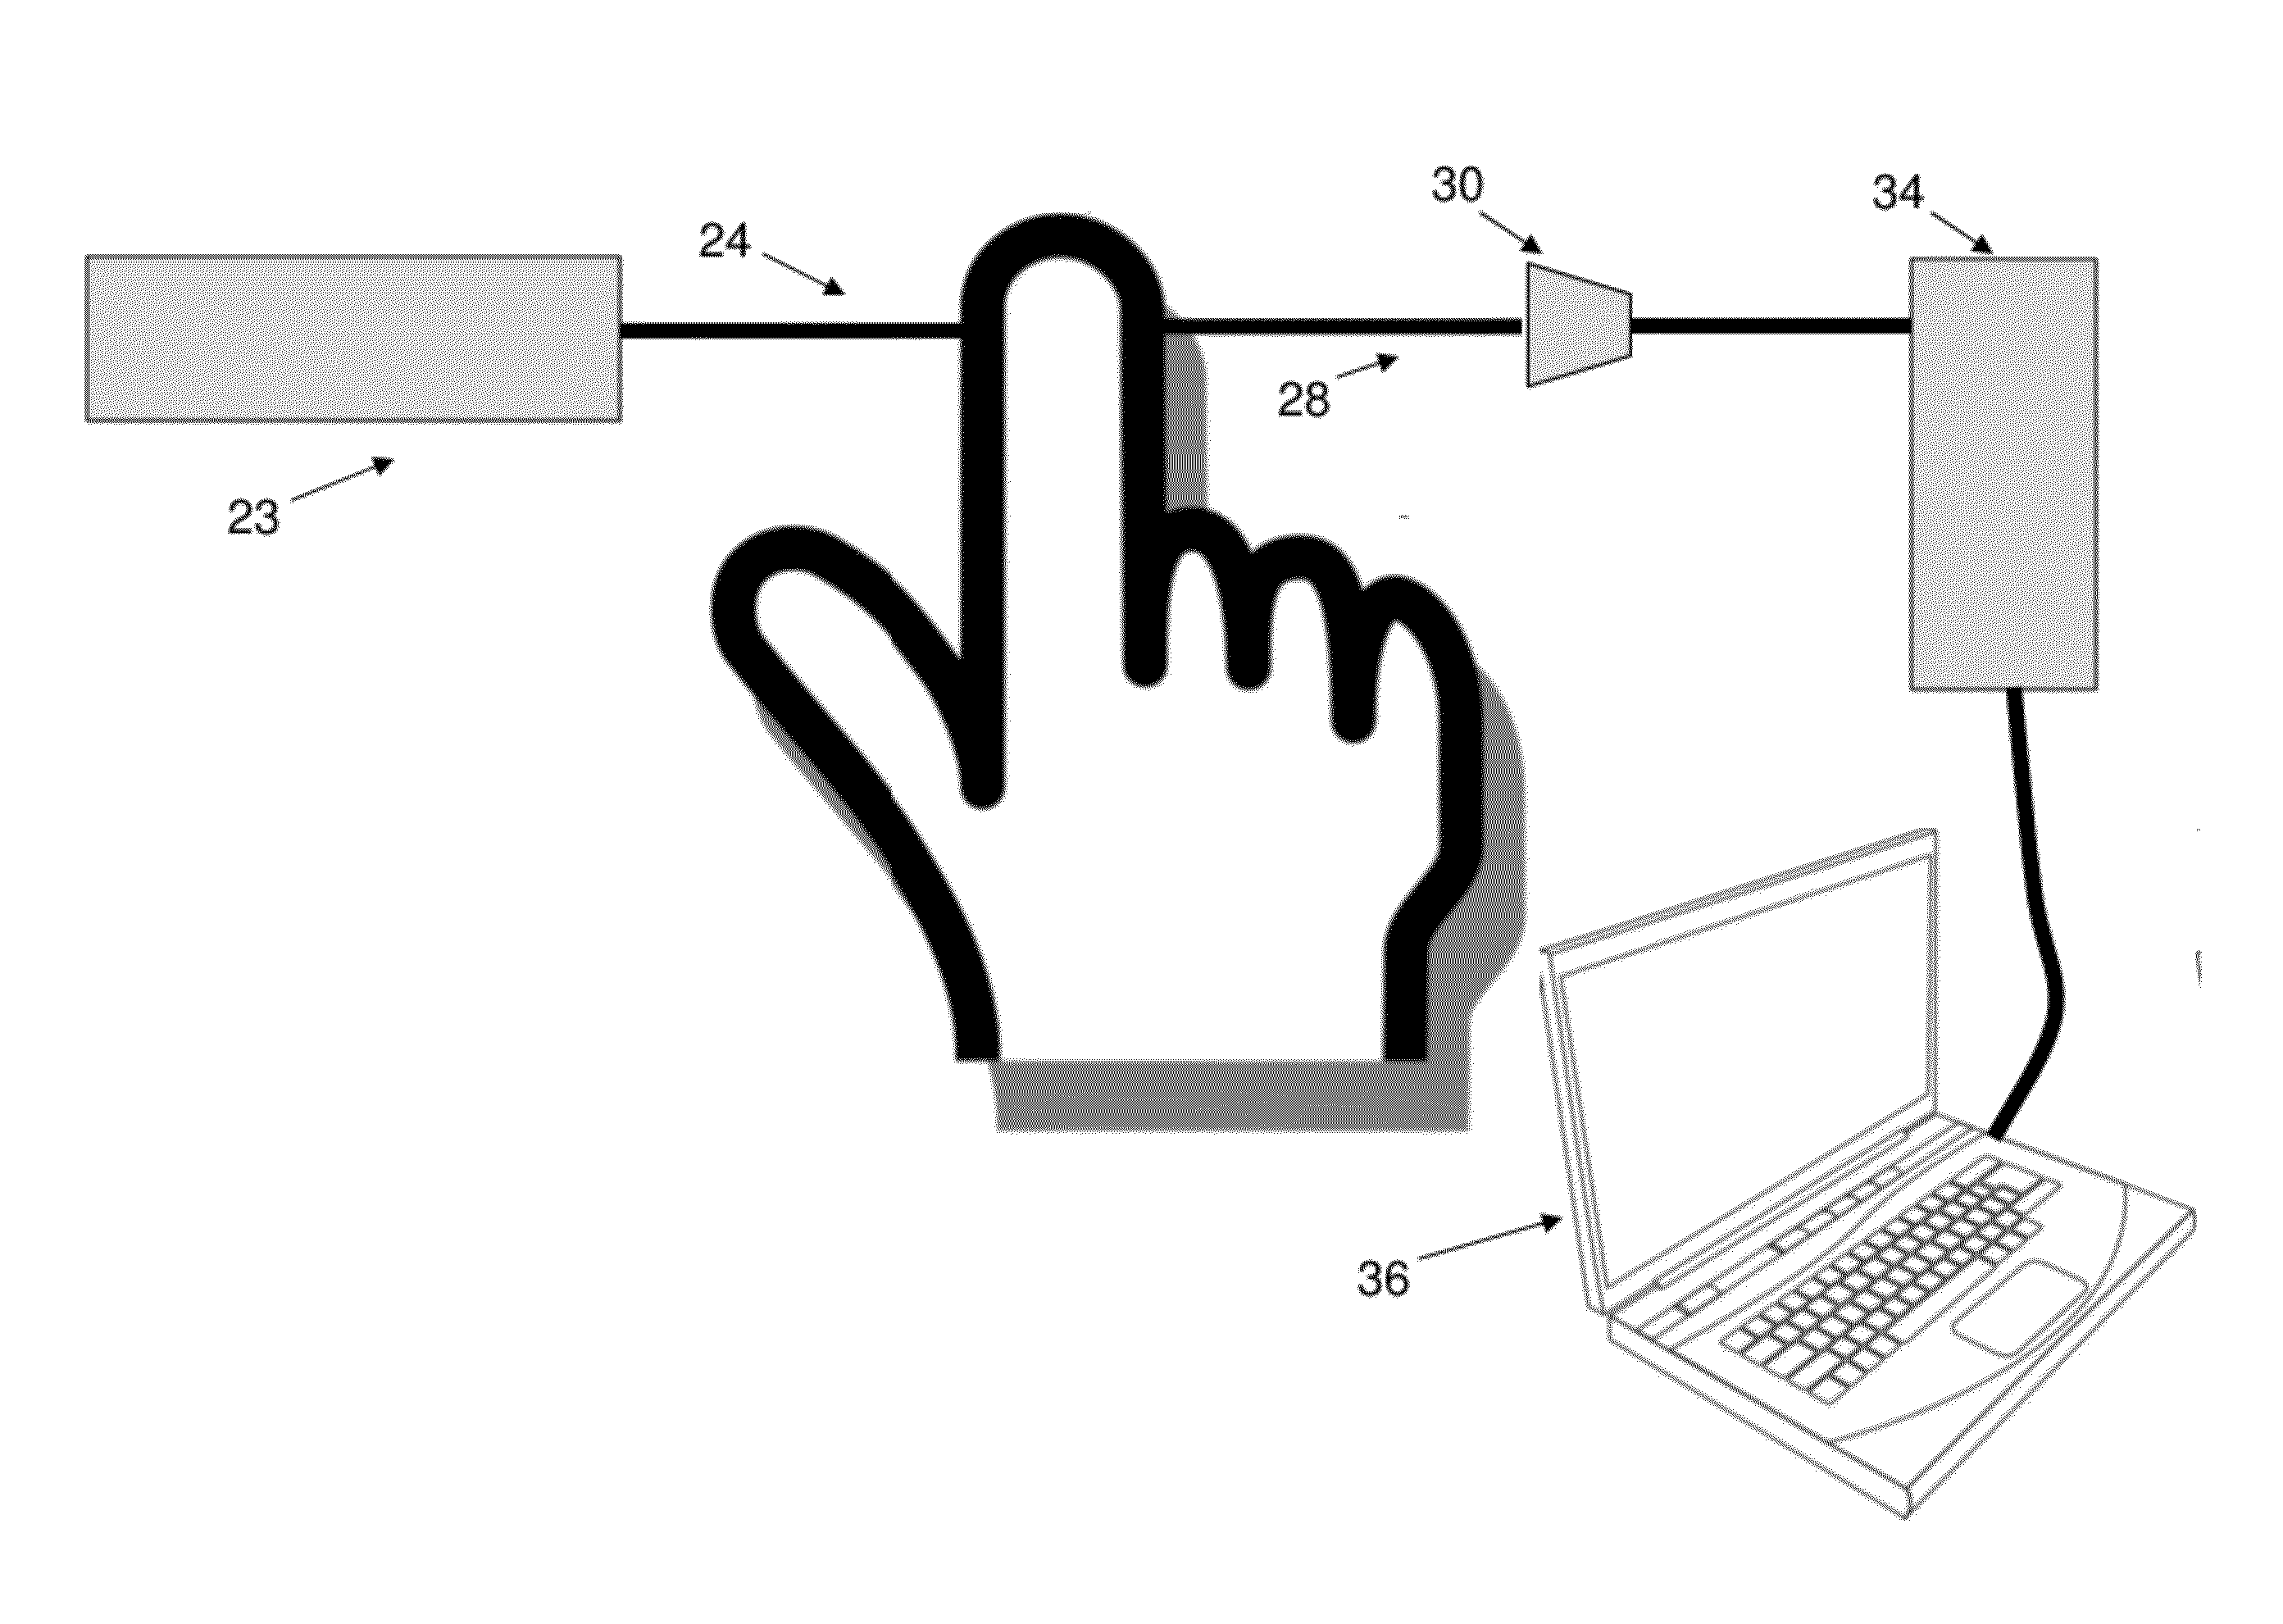 Systems, devices and methods for monitoring hemodynamics